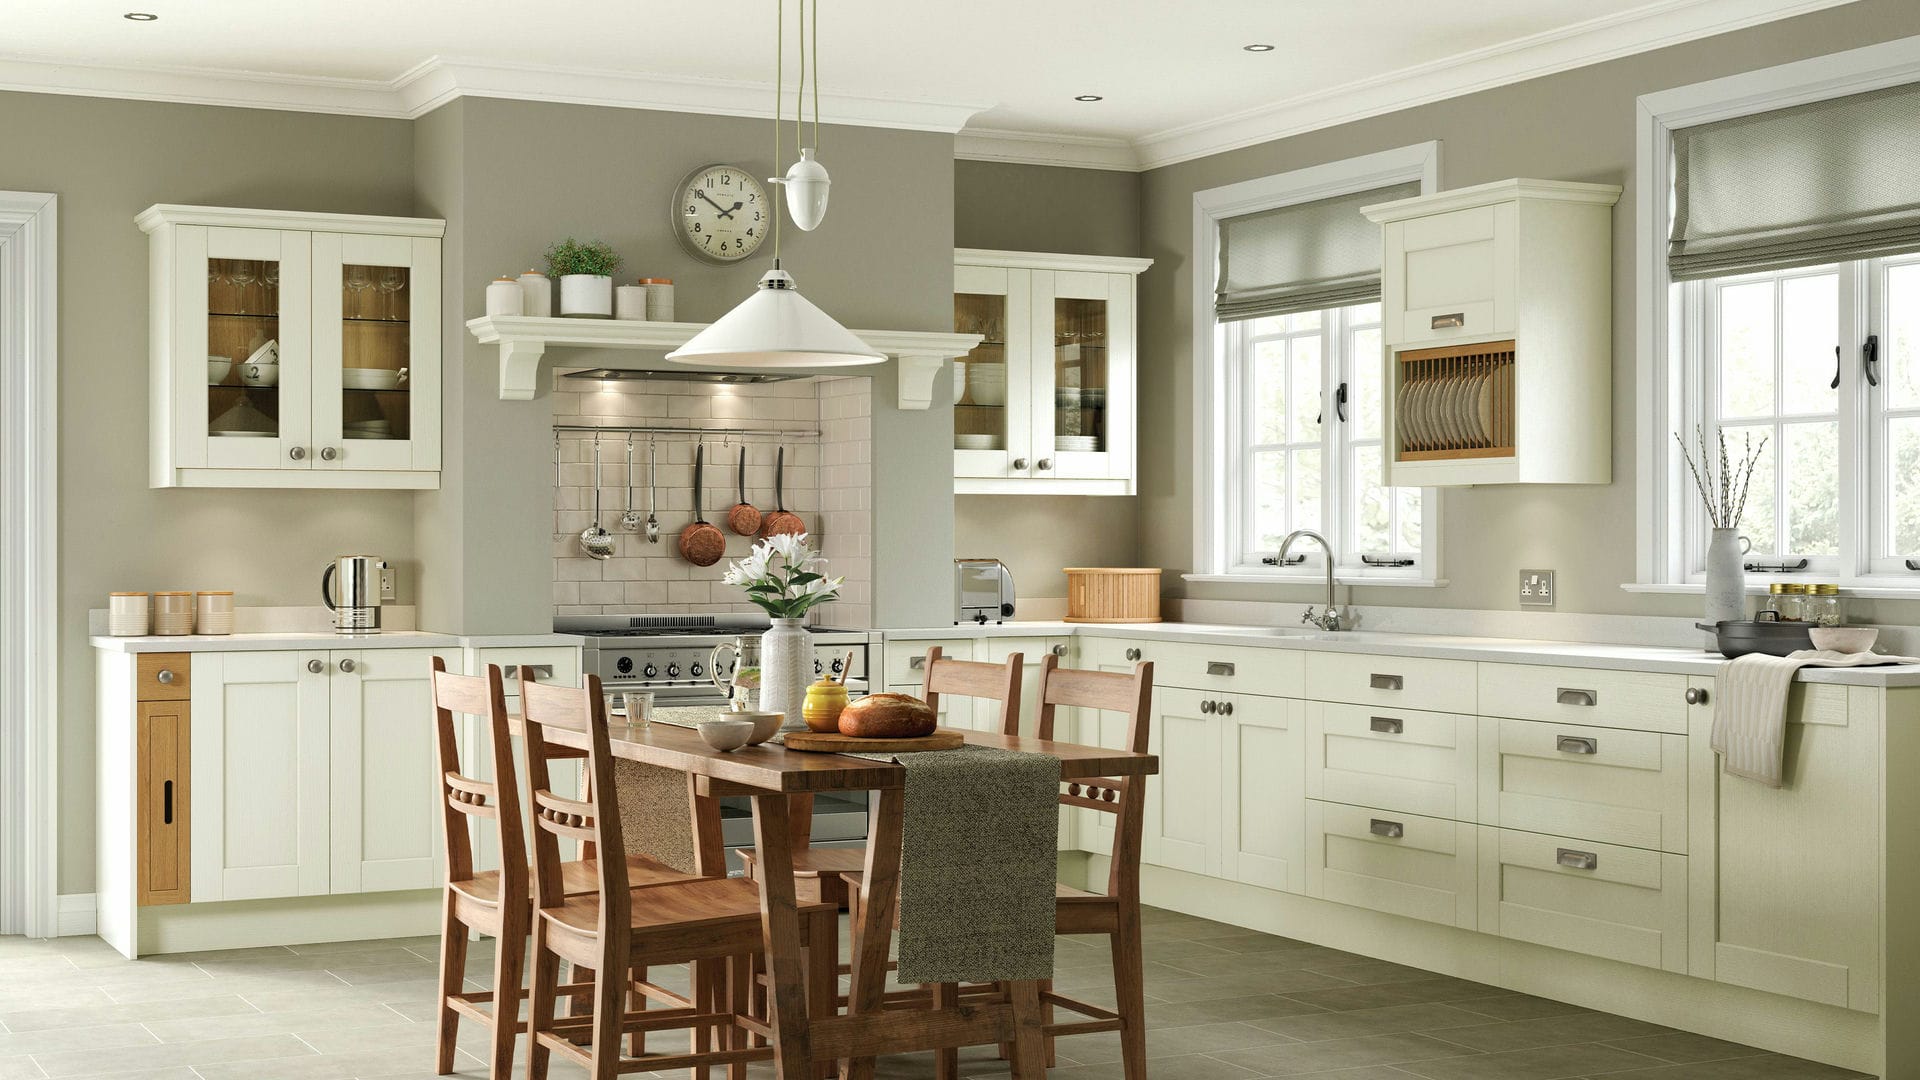 Modern shaker ivory kitchen blending classic design with contemporary aesthetics in kitchen layouts